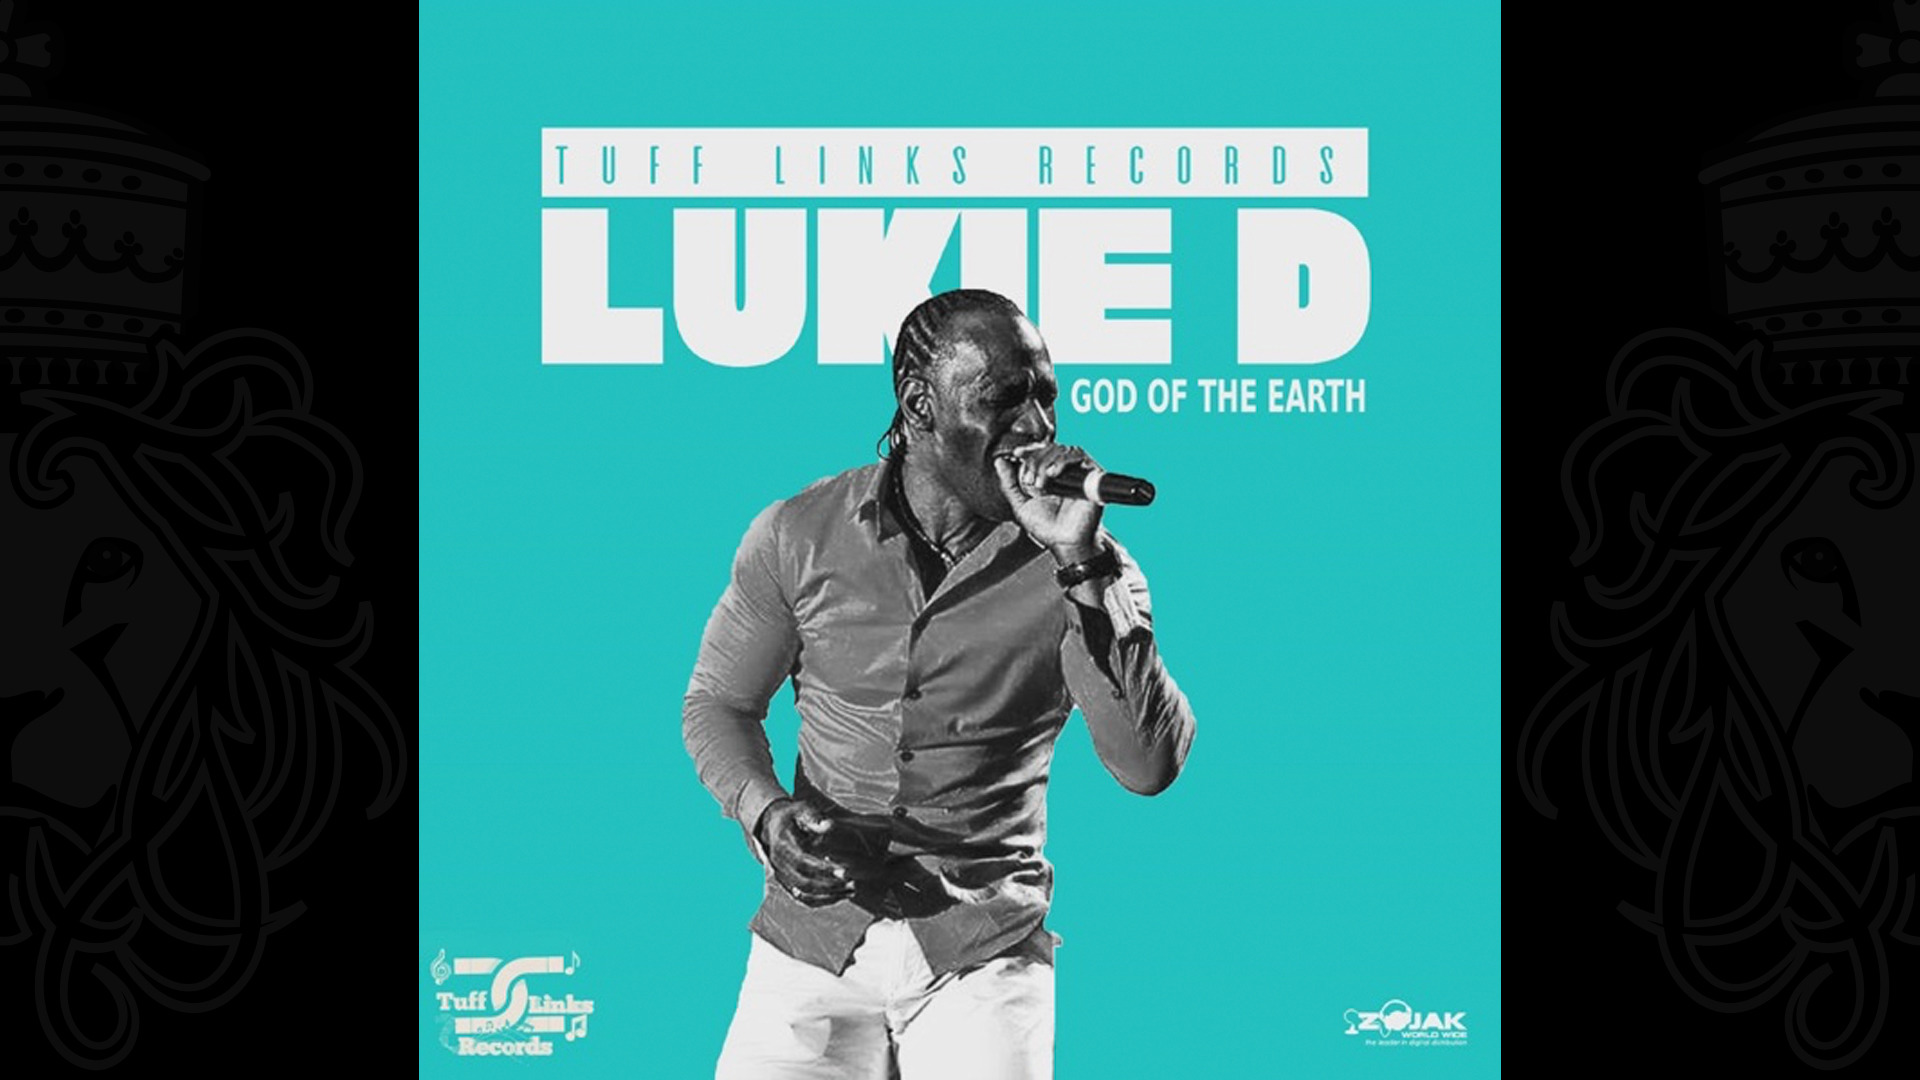 Lukie D - God of the Earth